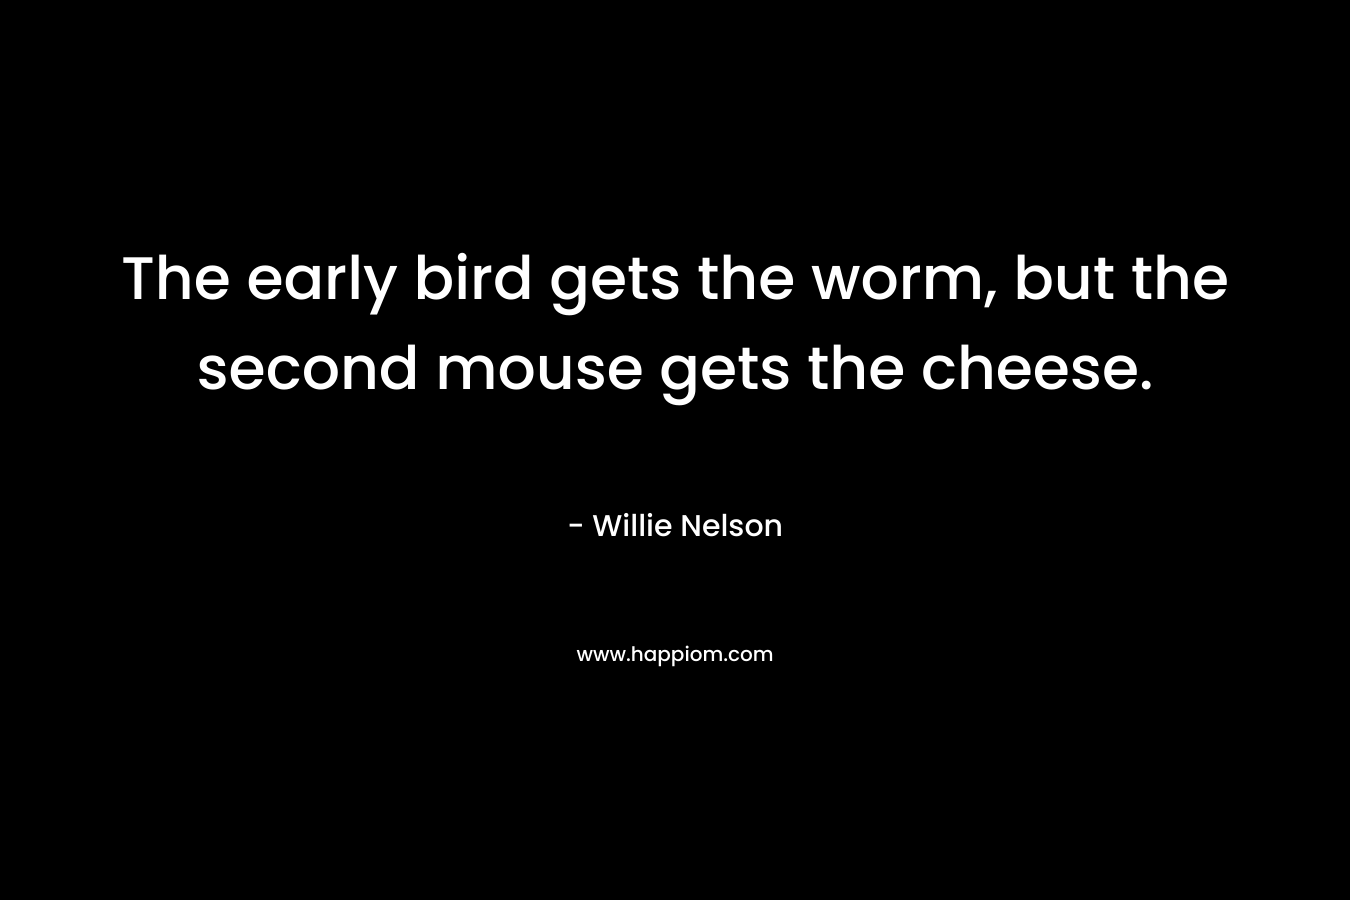 The early bird gets the worm, but the second mouse gets the cheese. – Willie Nelson